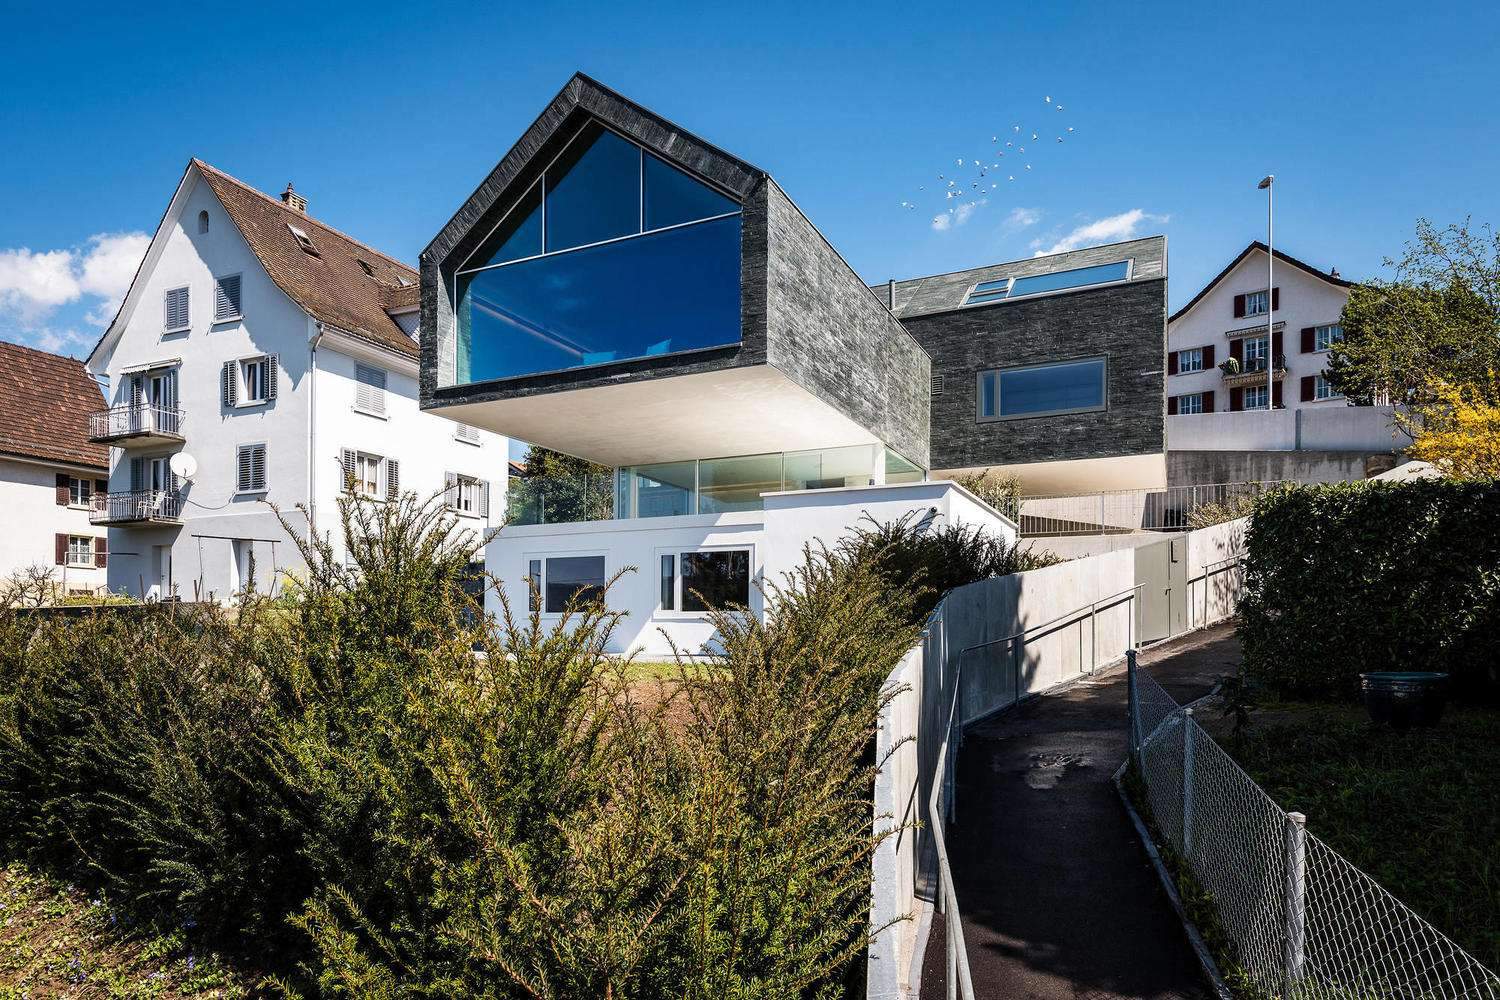 Swiss architecture shines in premium homes with great views